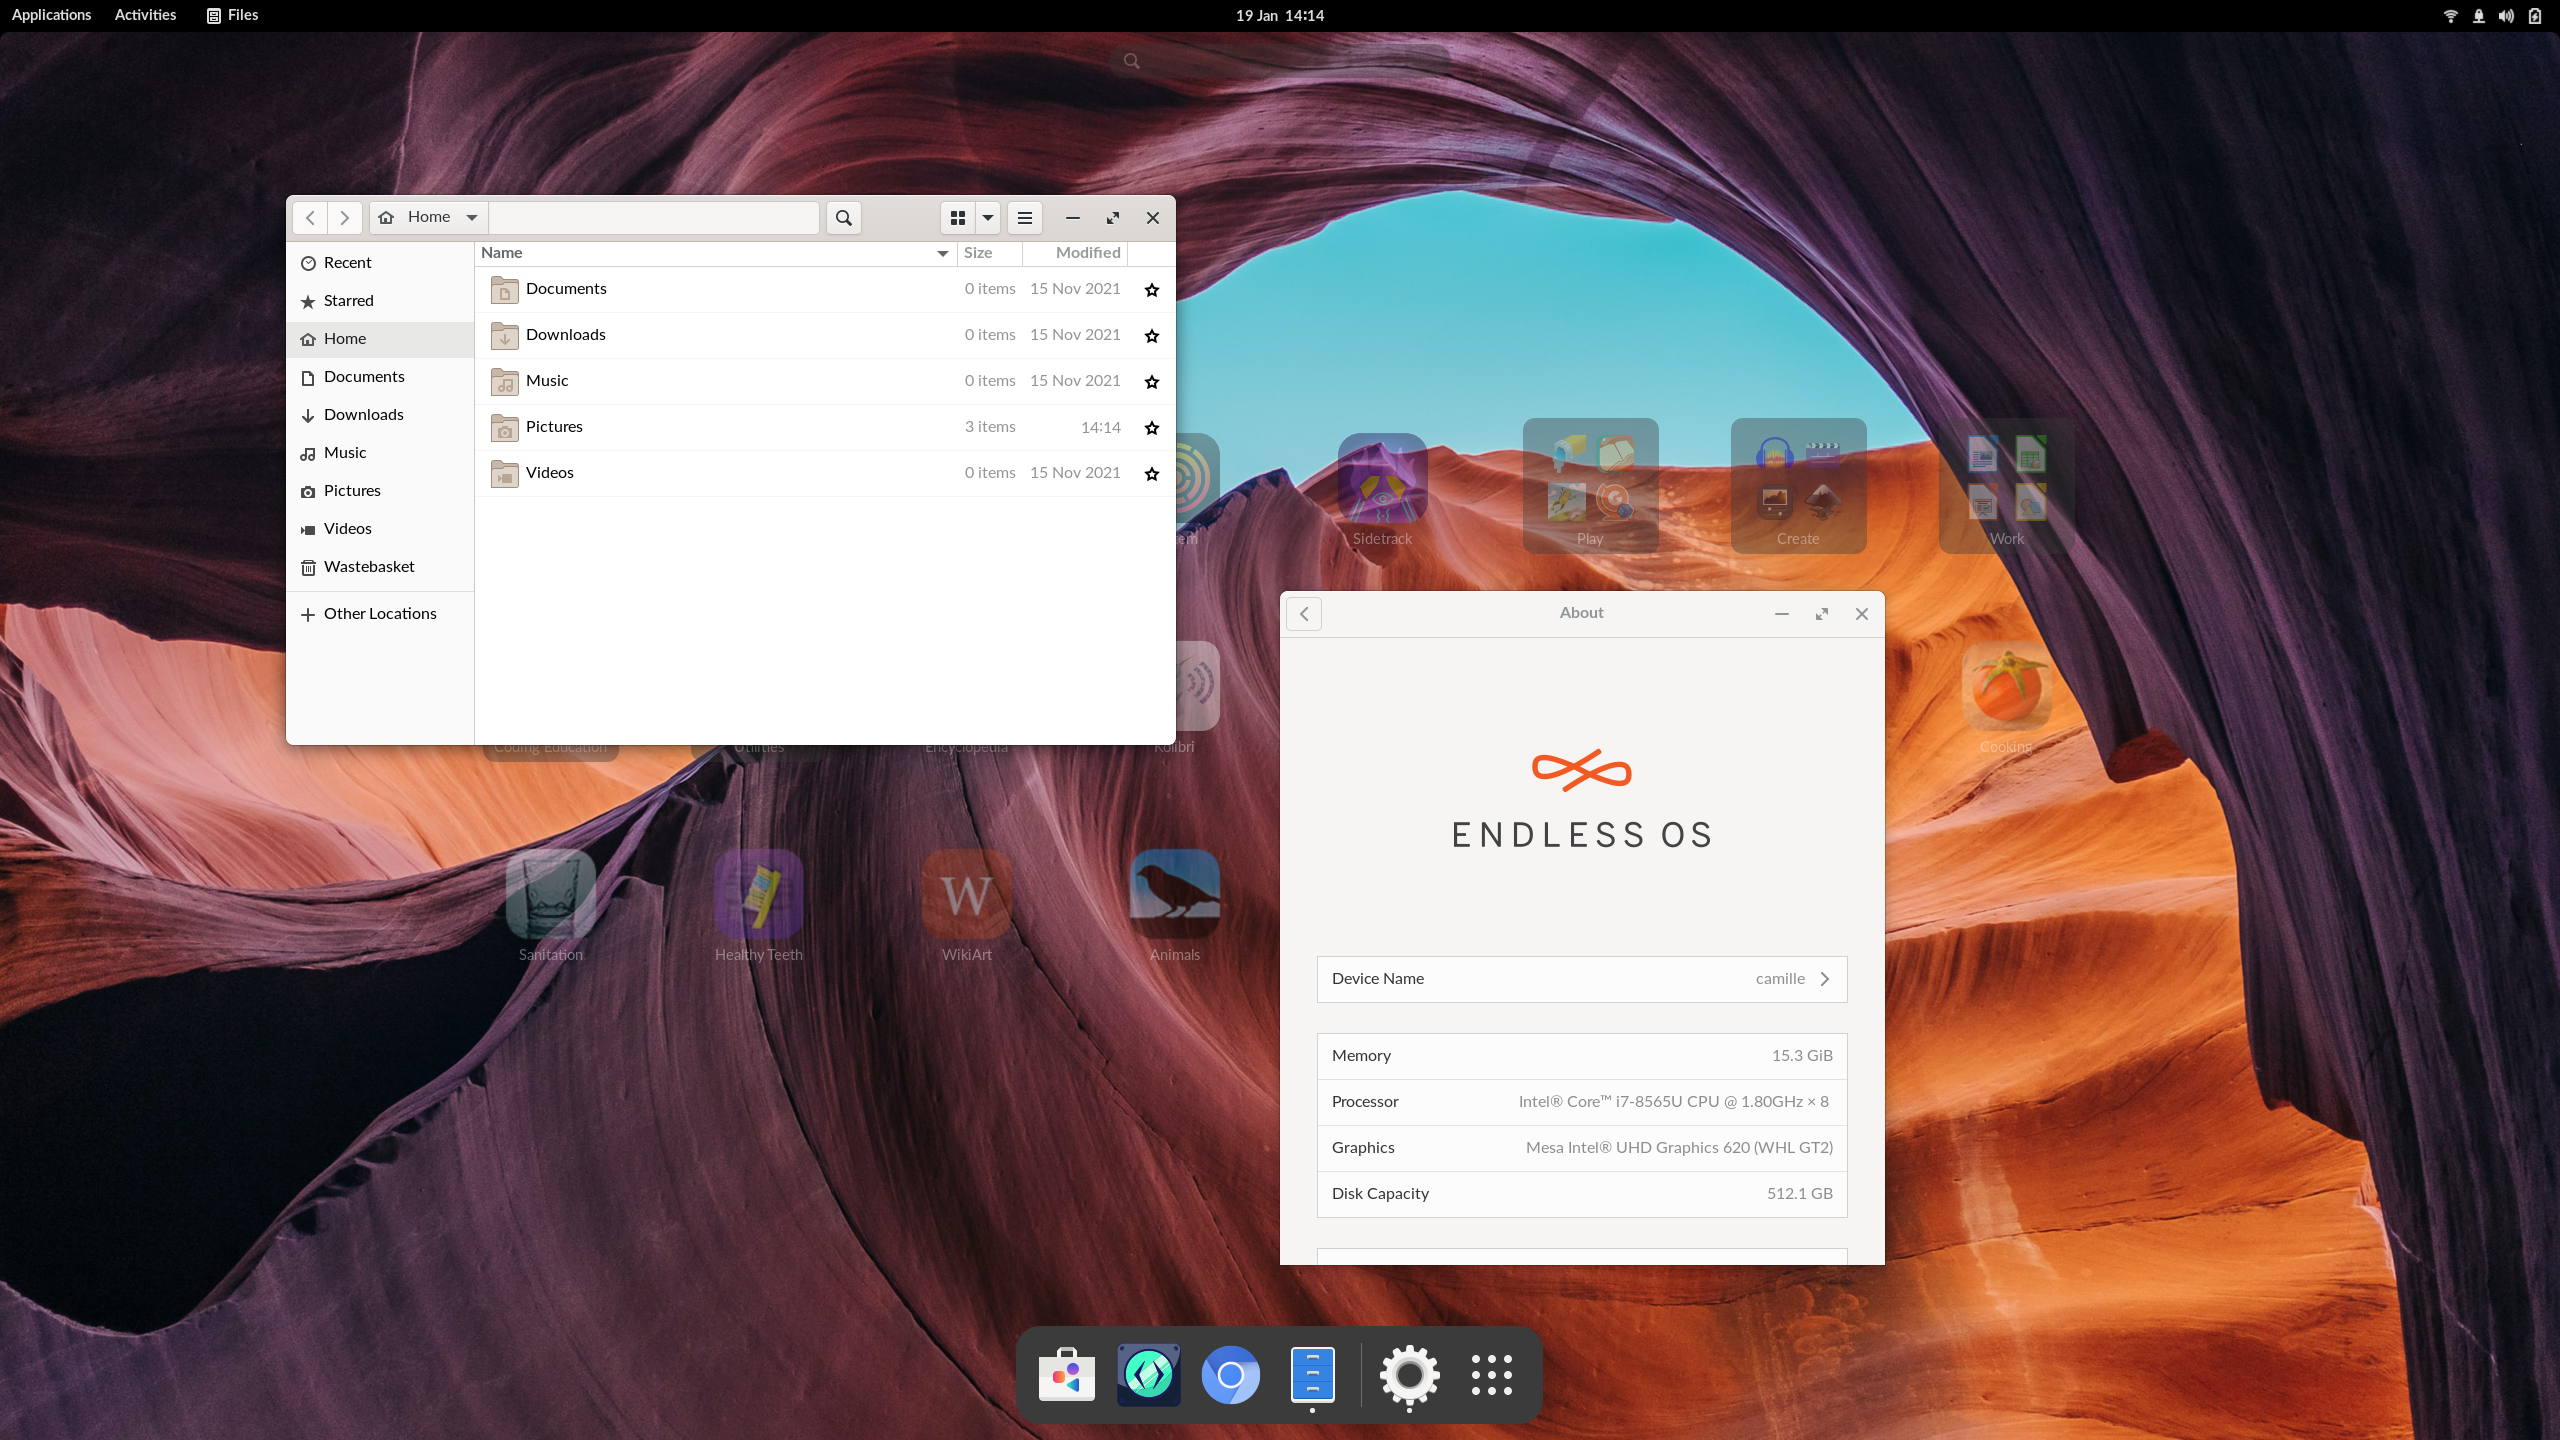 https://support.endlessos.org/release-notes-5.0.0-desktop-with-apps.png